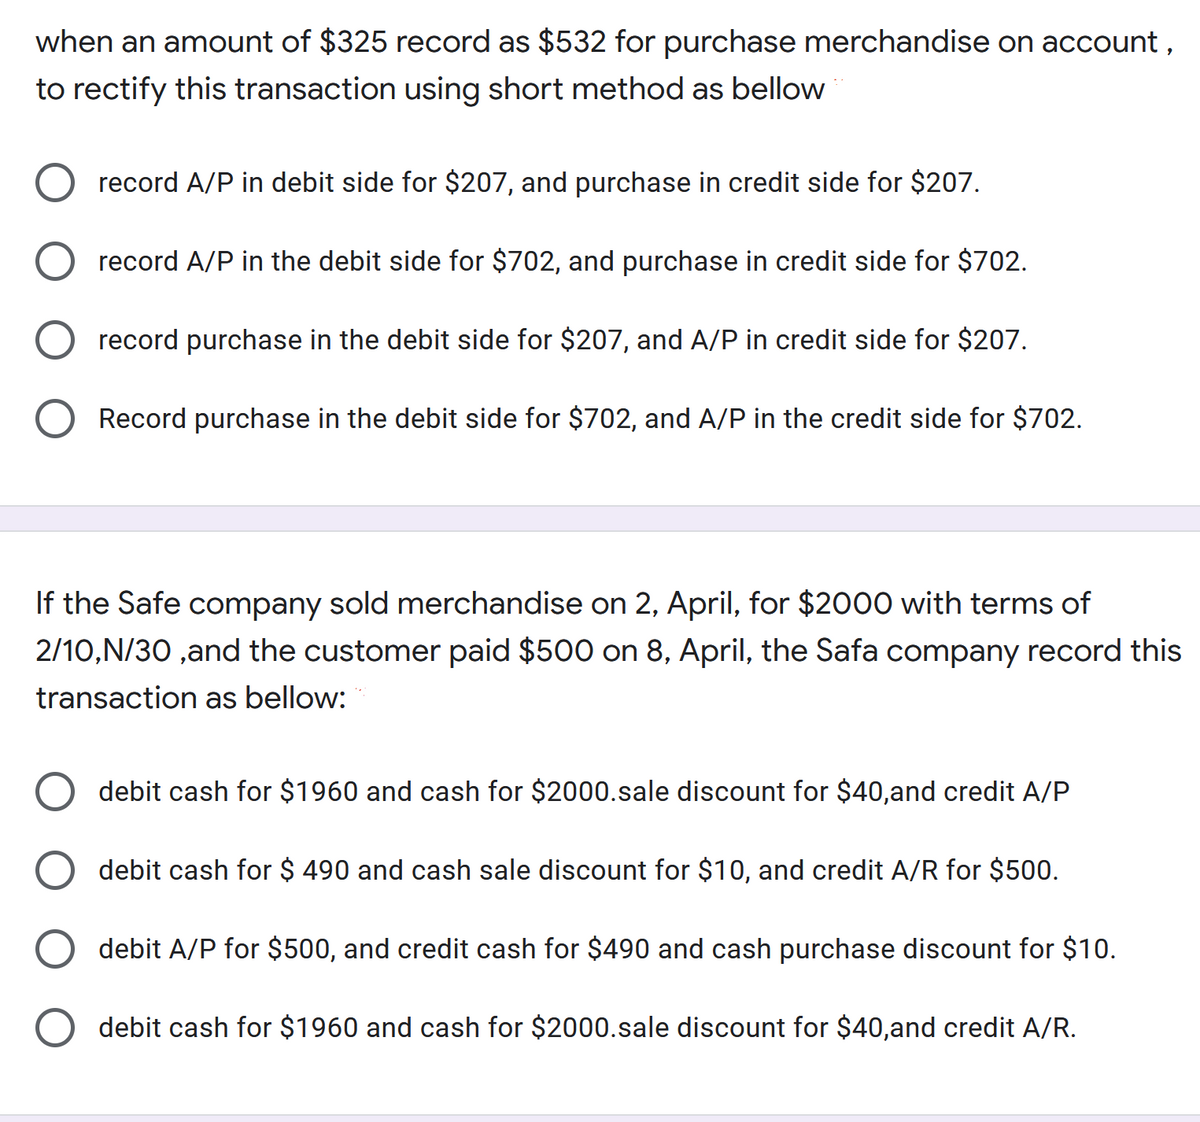 when an amount of $325 record as $532 for purchase merchandise on account ,
to rectify this transaction using short method as bellow
record A/P in debit side for $207, and purchase in credit side for $207.
record A/P in the debit side for $702, and purchase in credit side for $702.
record purchase in the debit side for $207, and A/P in credit side for $207.
Record purchase in the debit side for $702, and A/P in the credit side for $702.
If the Safe company sold merchandise on 2, April, for $2000 with terms of
2/10,N/30 ,and the customer paid $500 on 8, April, the Safa company record this
transaction as bellow:
debit cash for $1960 and cash for $2000.sale discount for $40,and credit A/P
debit cash for $ 490 and cash sale discount for $10, and credit A/R for $500.
debit A/P for $500, and credit cash for $490 and cash purchase discount for $10.
debit cash for $1960 and cash for $2000.sale discount for $40,and credit A/R.
